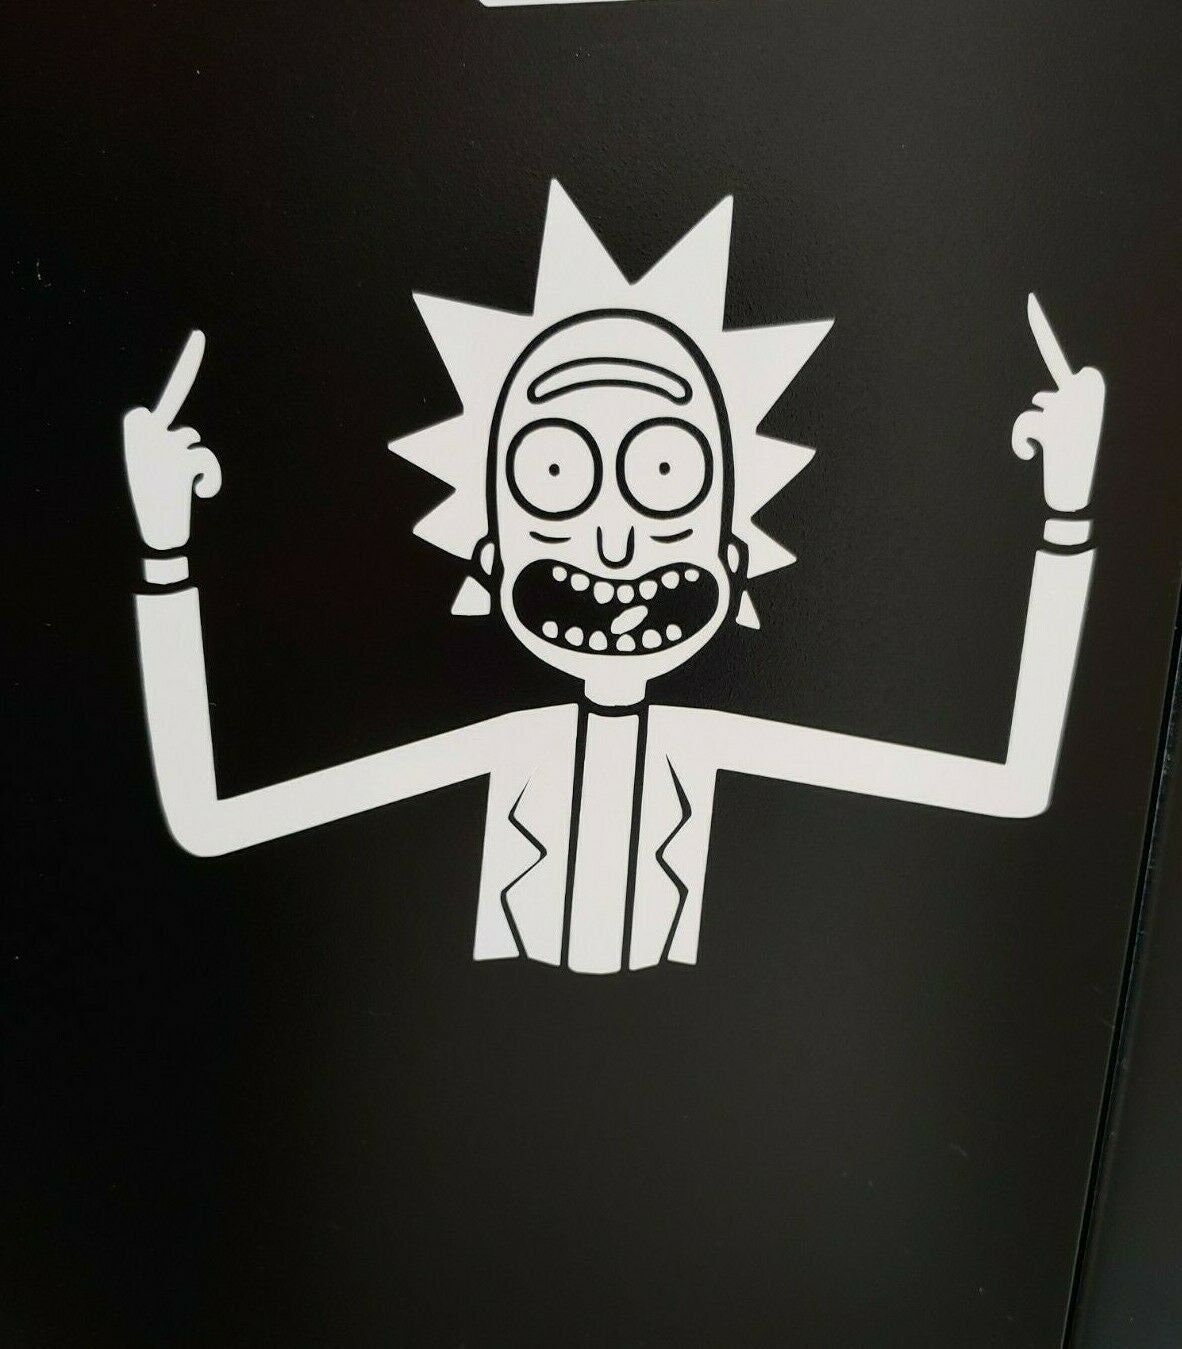 VISIT TO SEE BETTER QUALITY  Iphone wallpaper rick and morty, Rick and  morty stickers, Rick and morty drawing